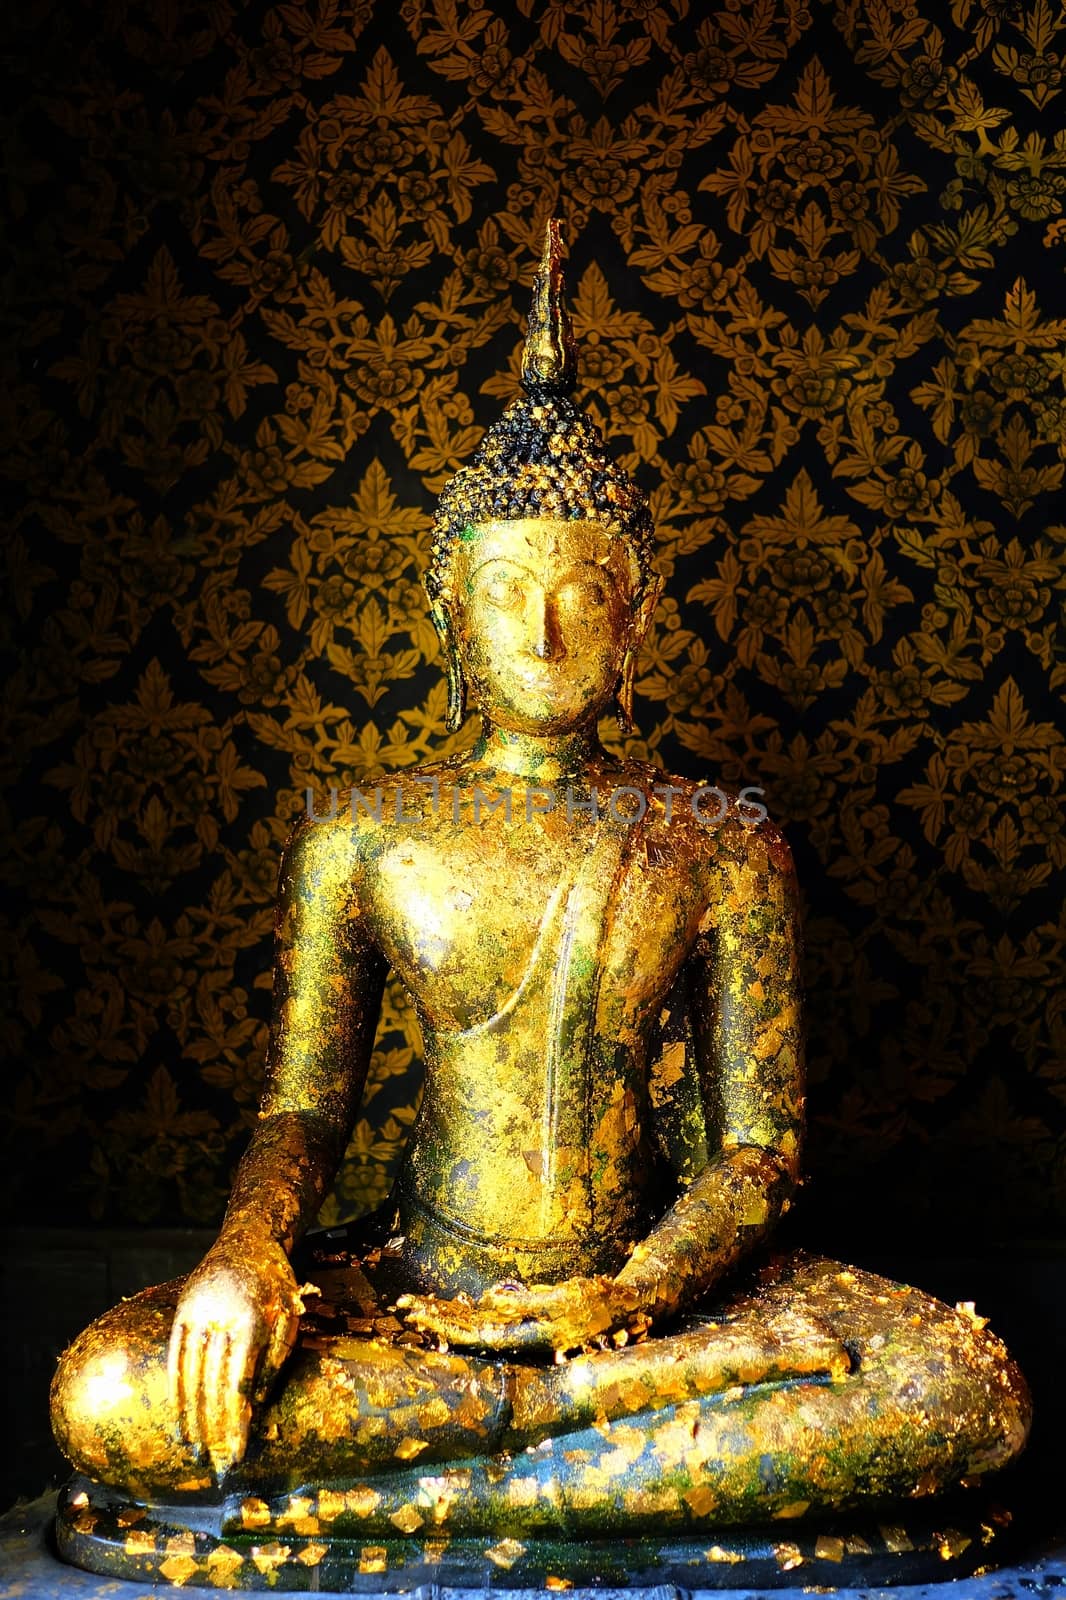 Ancient Golden Buddha Image in Main Hall.